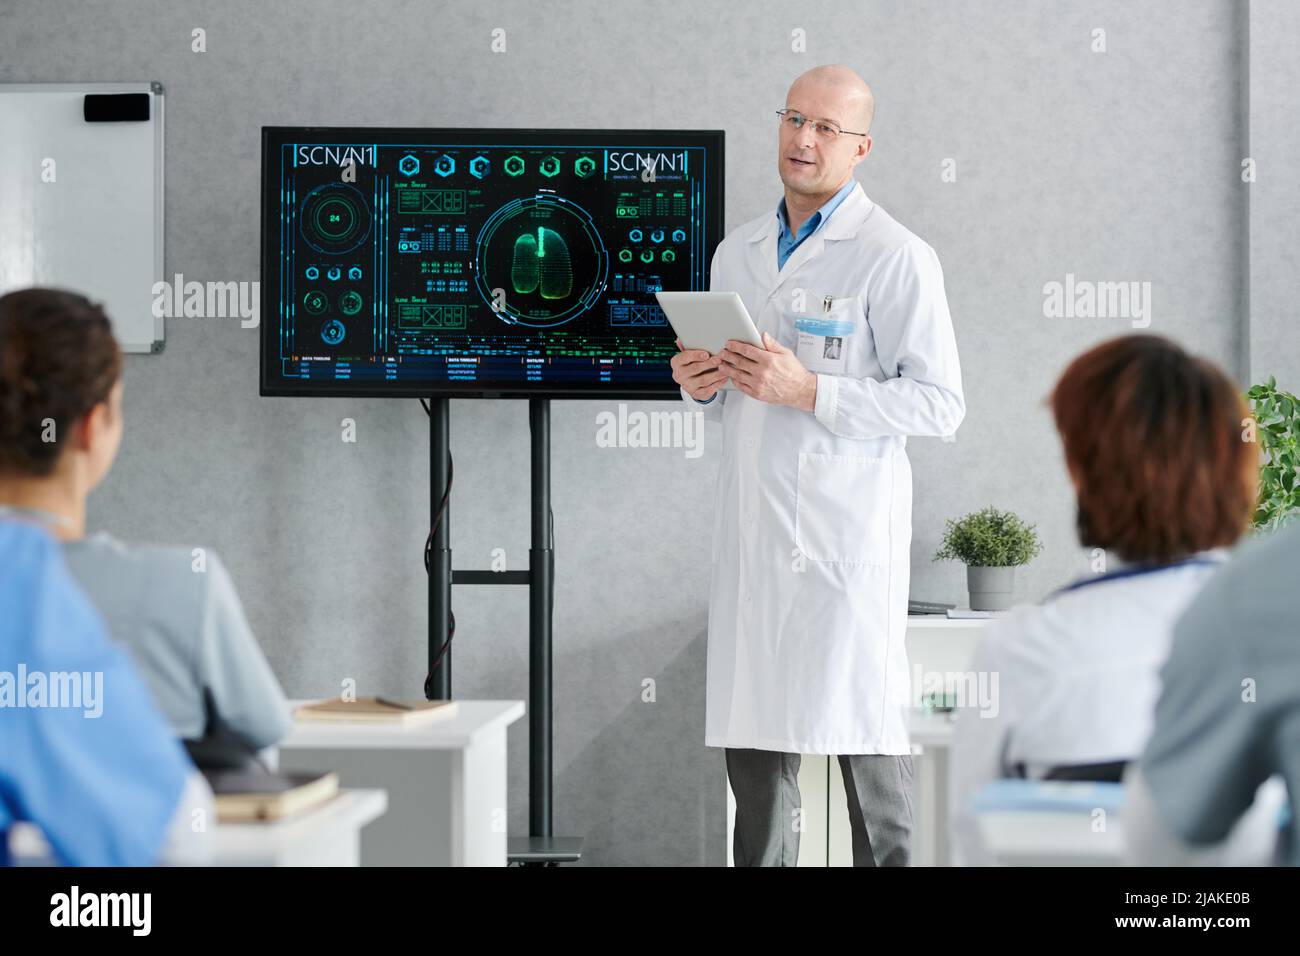 Mature lecturer in white coat standing at big display with medical charts on it and giving lecture to students Stock Photo